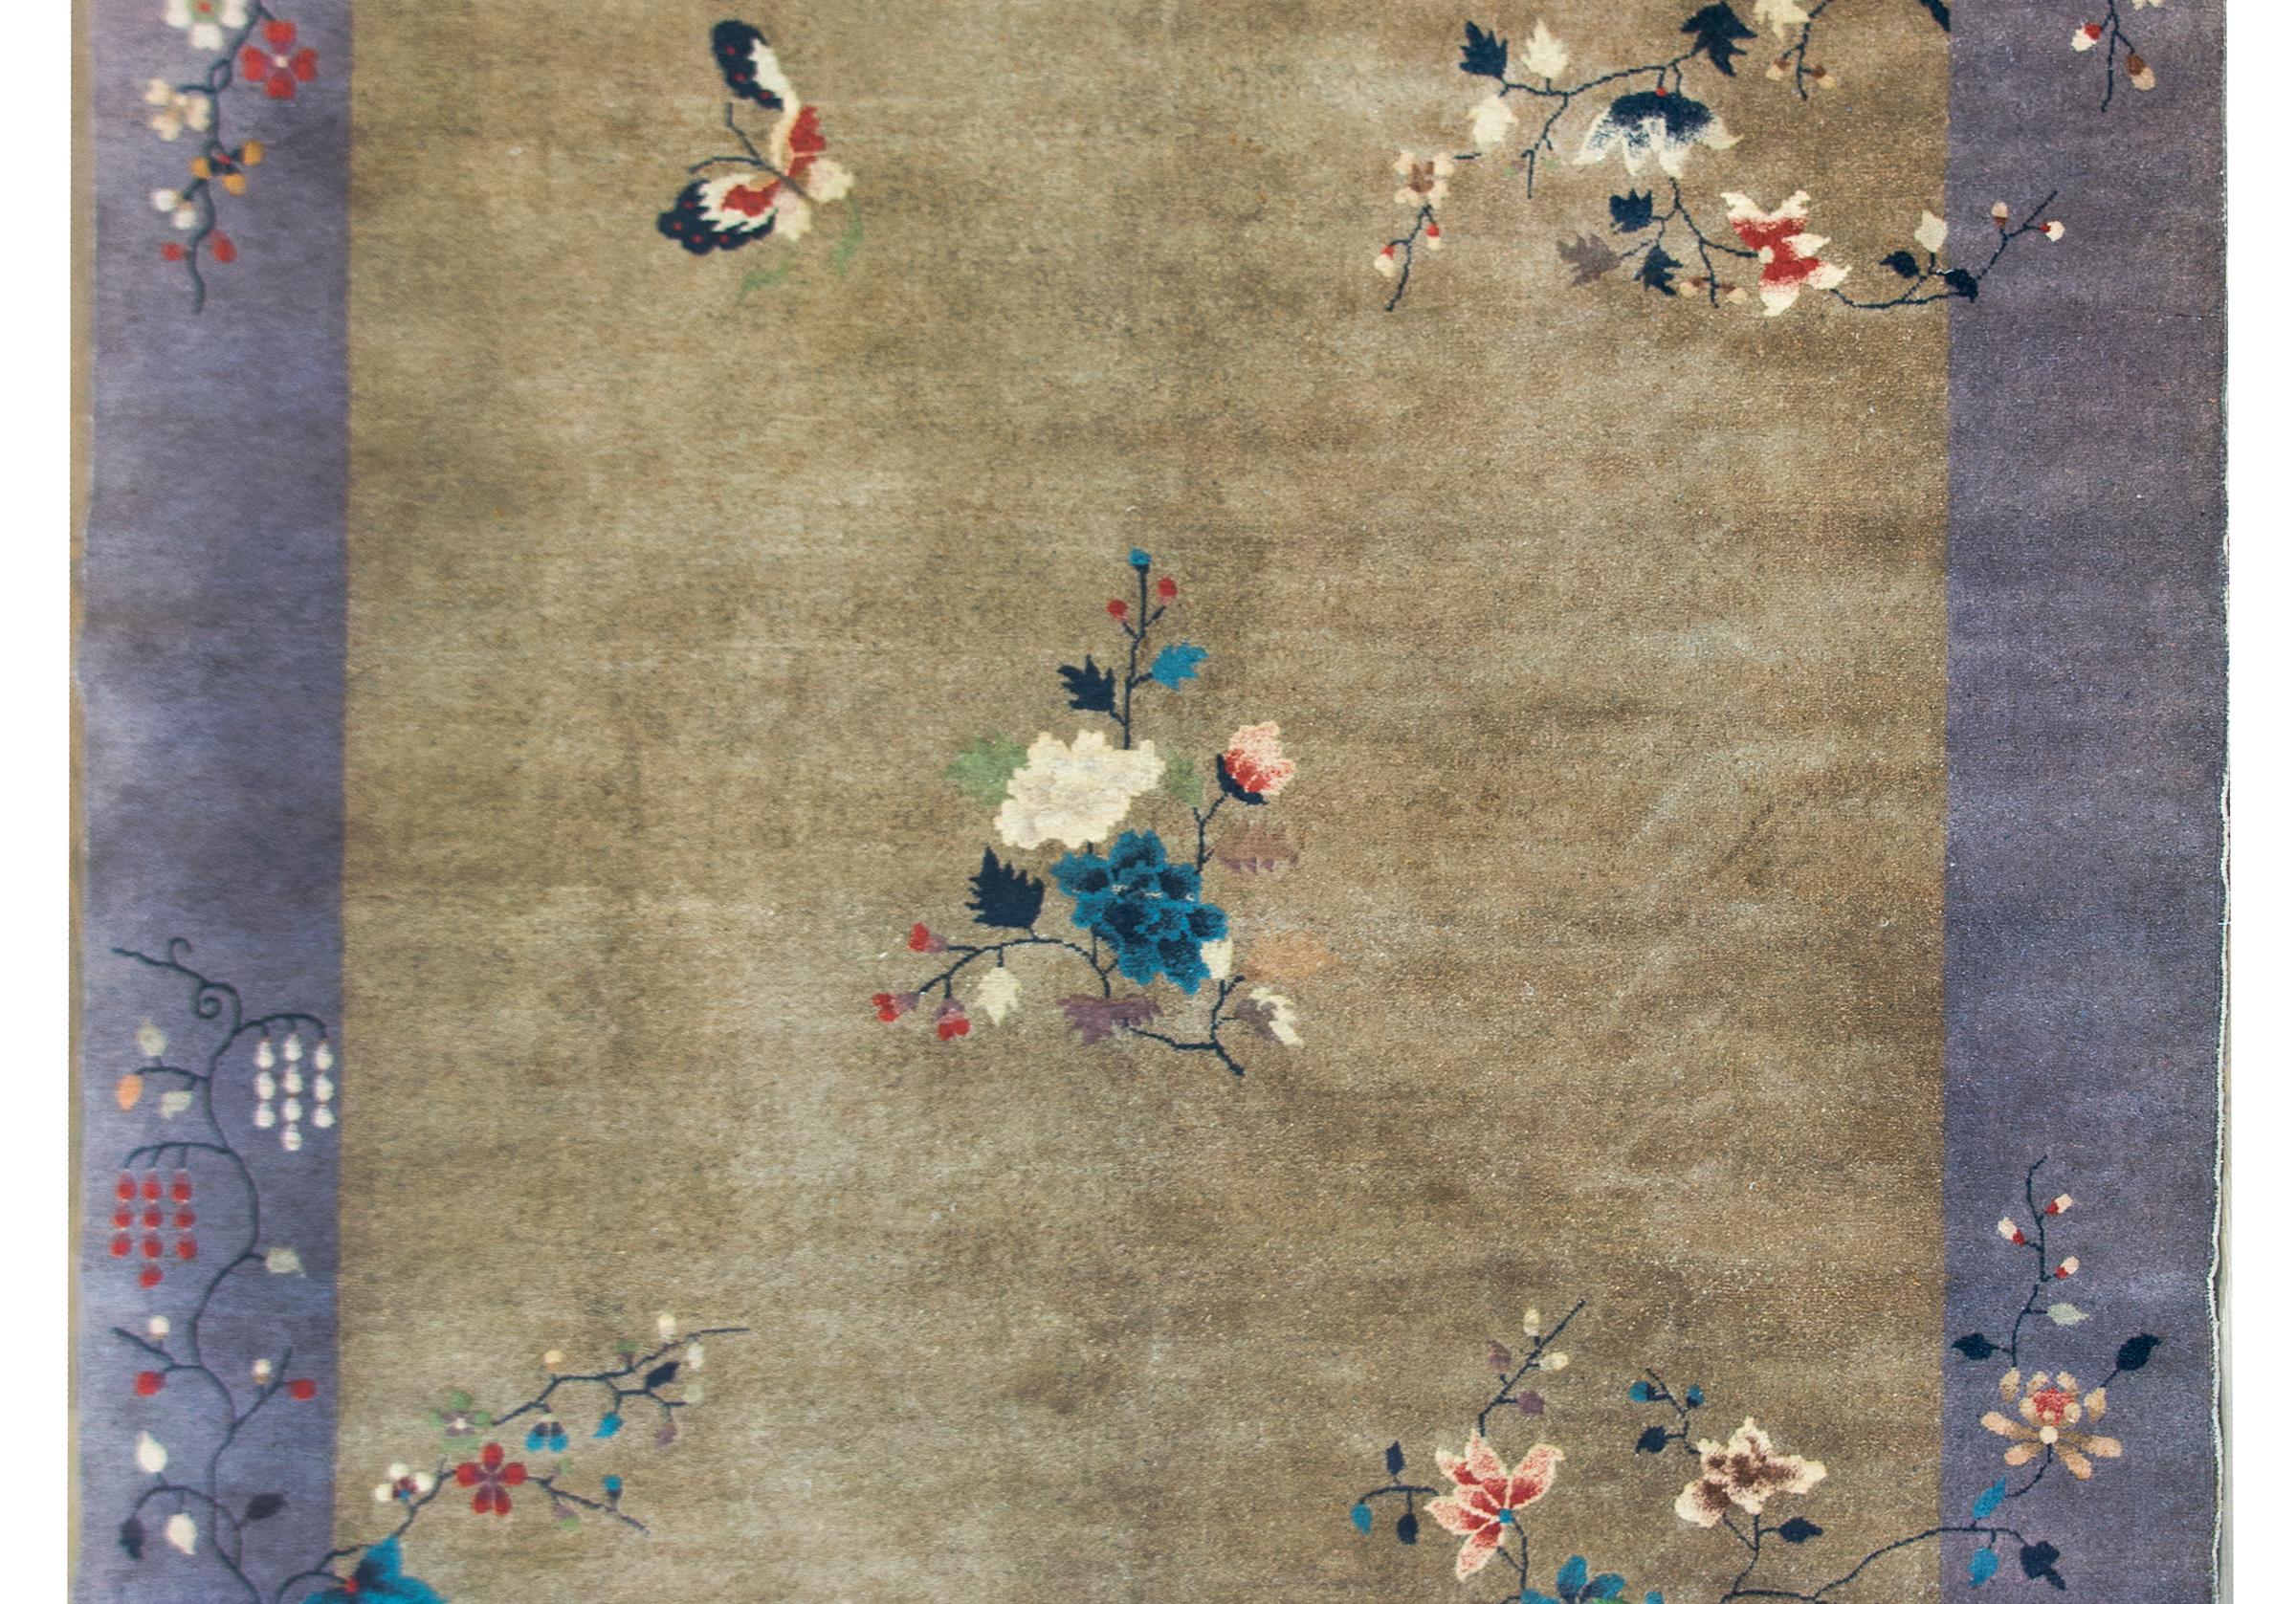 A wonderful early 20th century Chinese Art Deco rug with a chic gray field surround by another gray border, and all overlaid with myriad auspicious flowers including peonies, wisteria, chrysanthemums, and cherry blossoms, all woven in light and dark